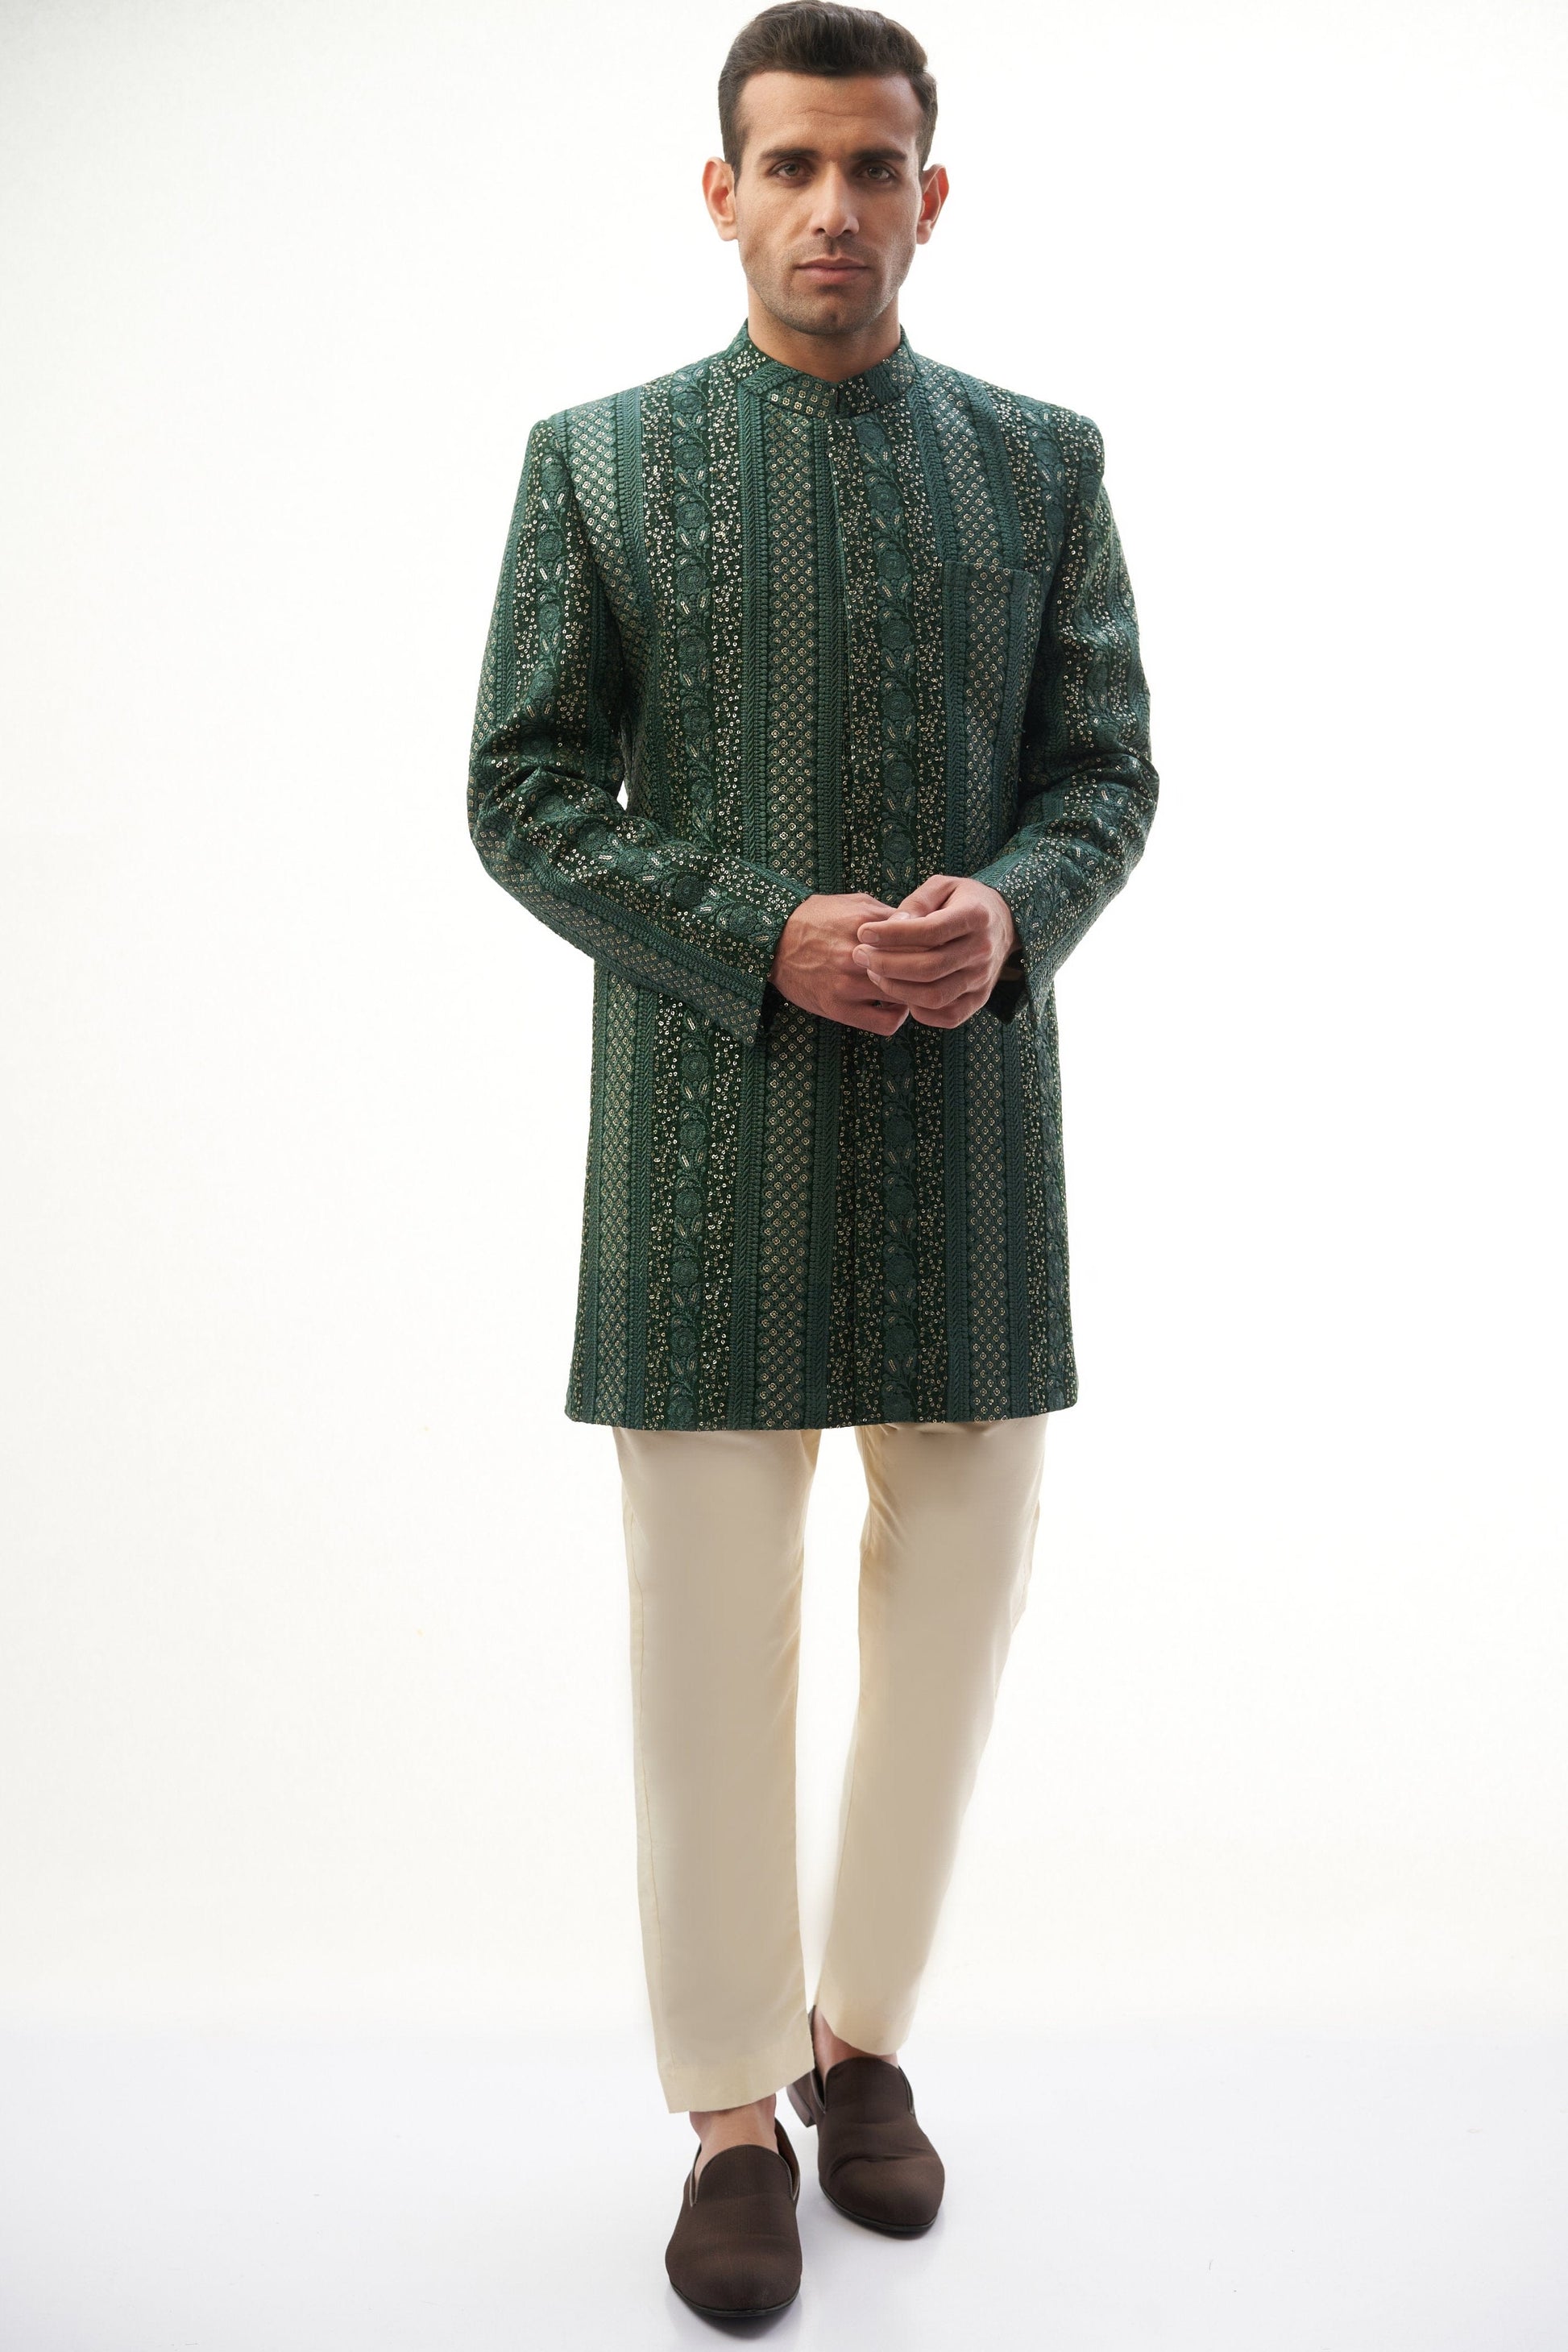  Green & Gold Short-Length Sherwani with Sequins